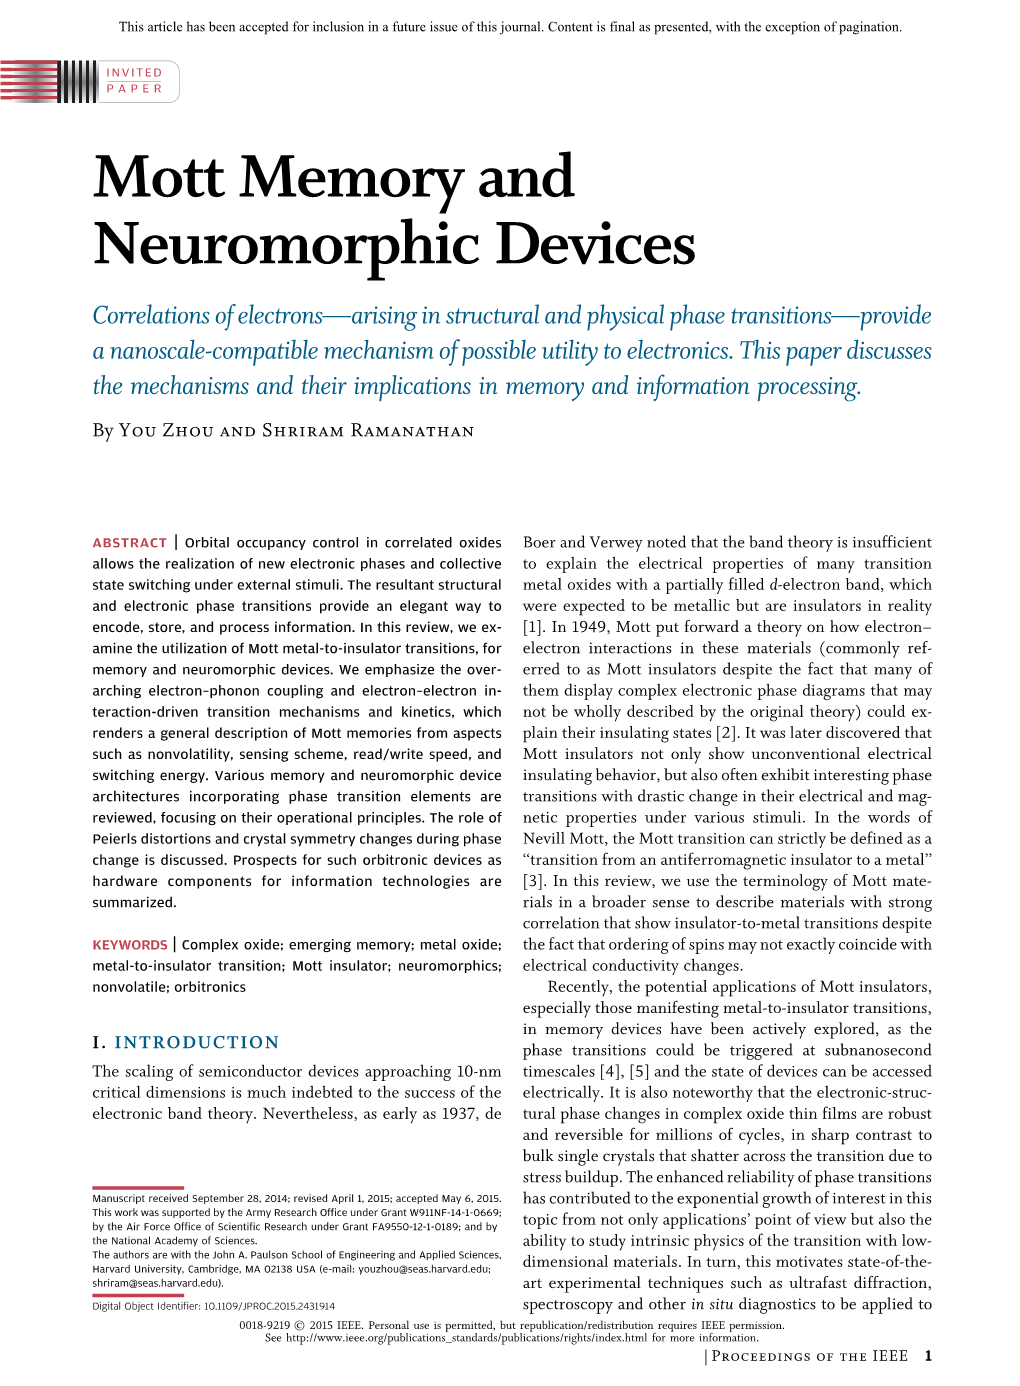 Mott Memory and Neuromorphic Devices